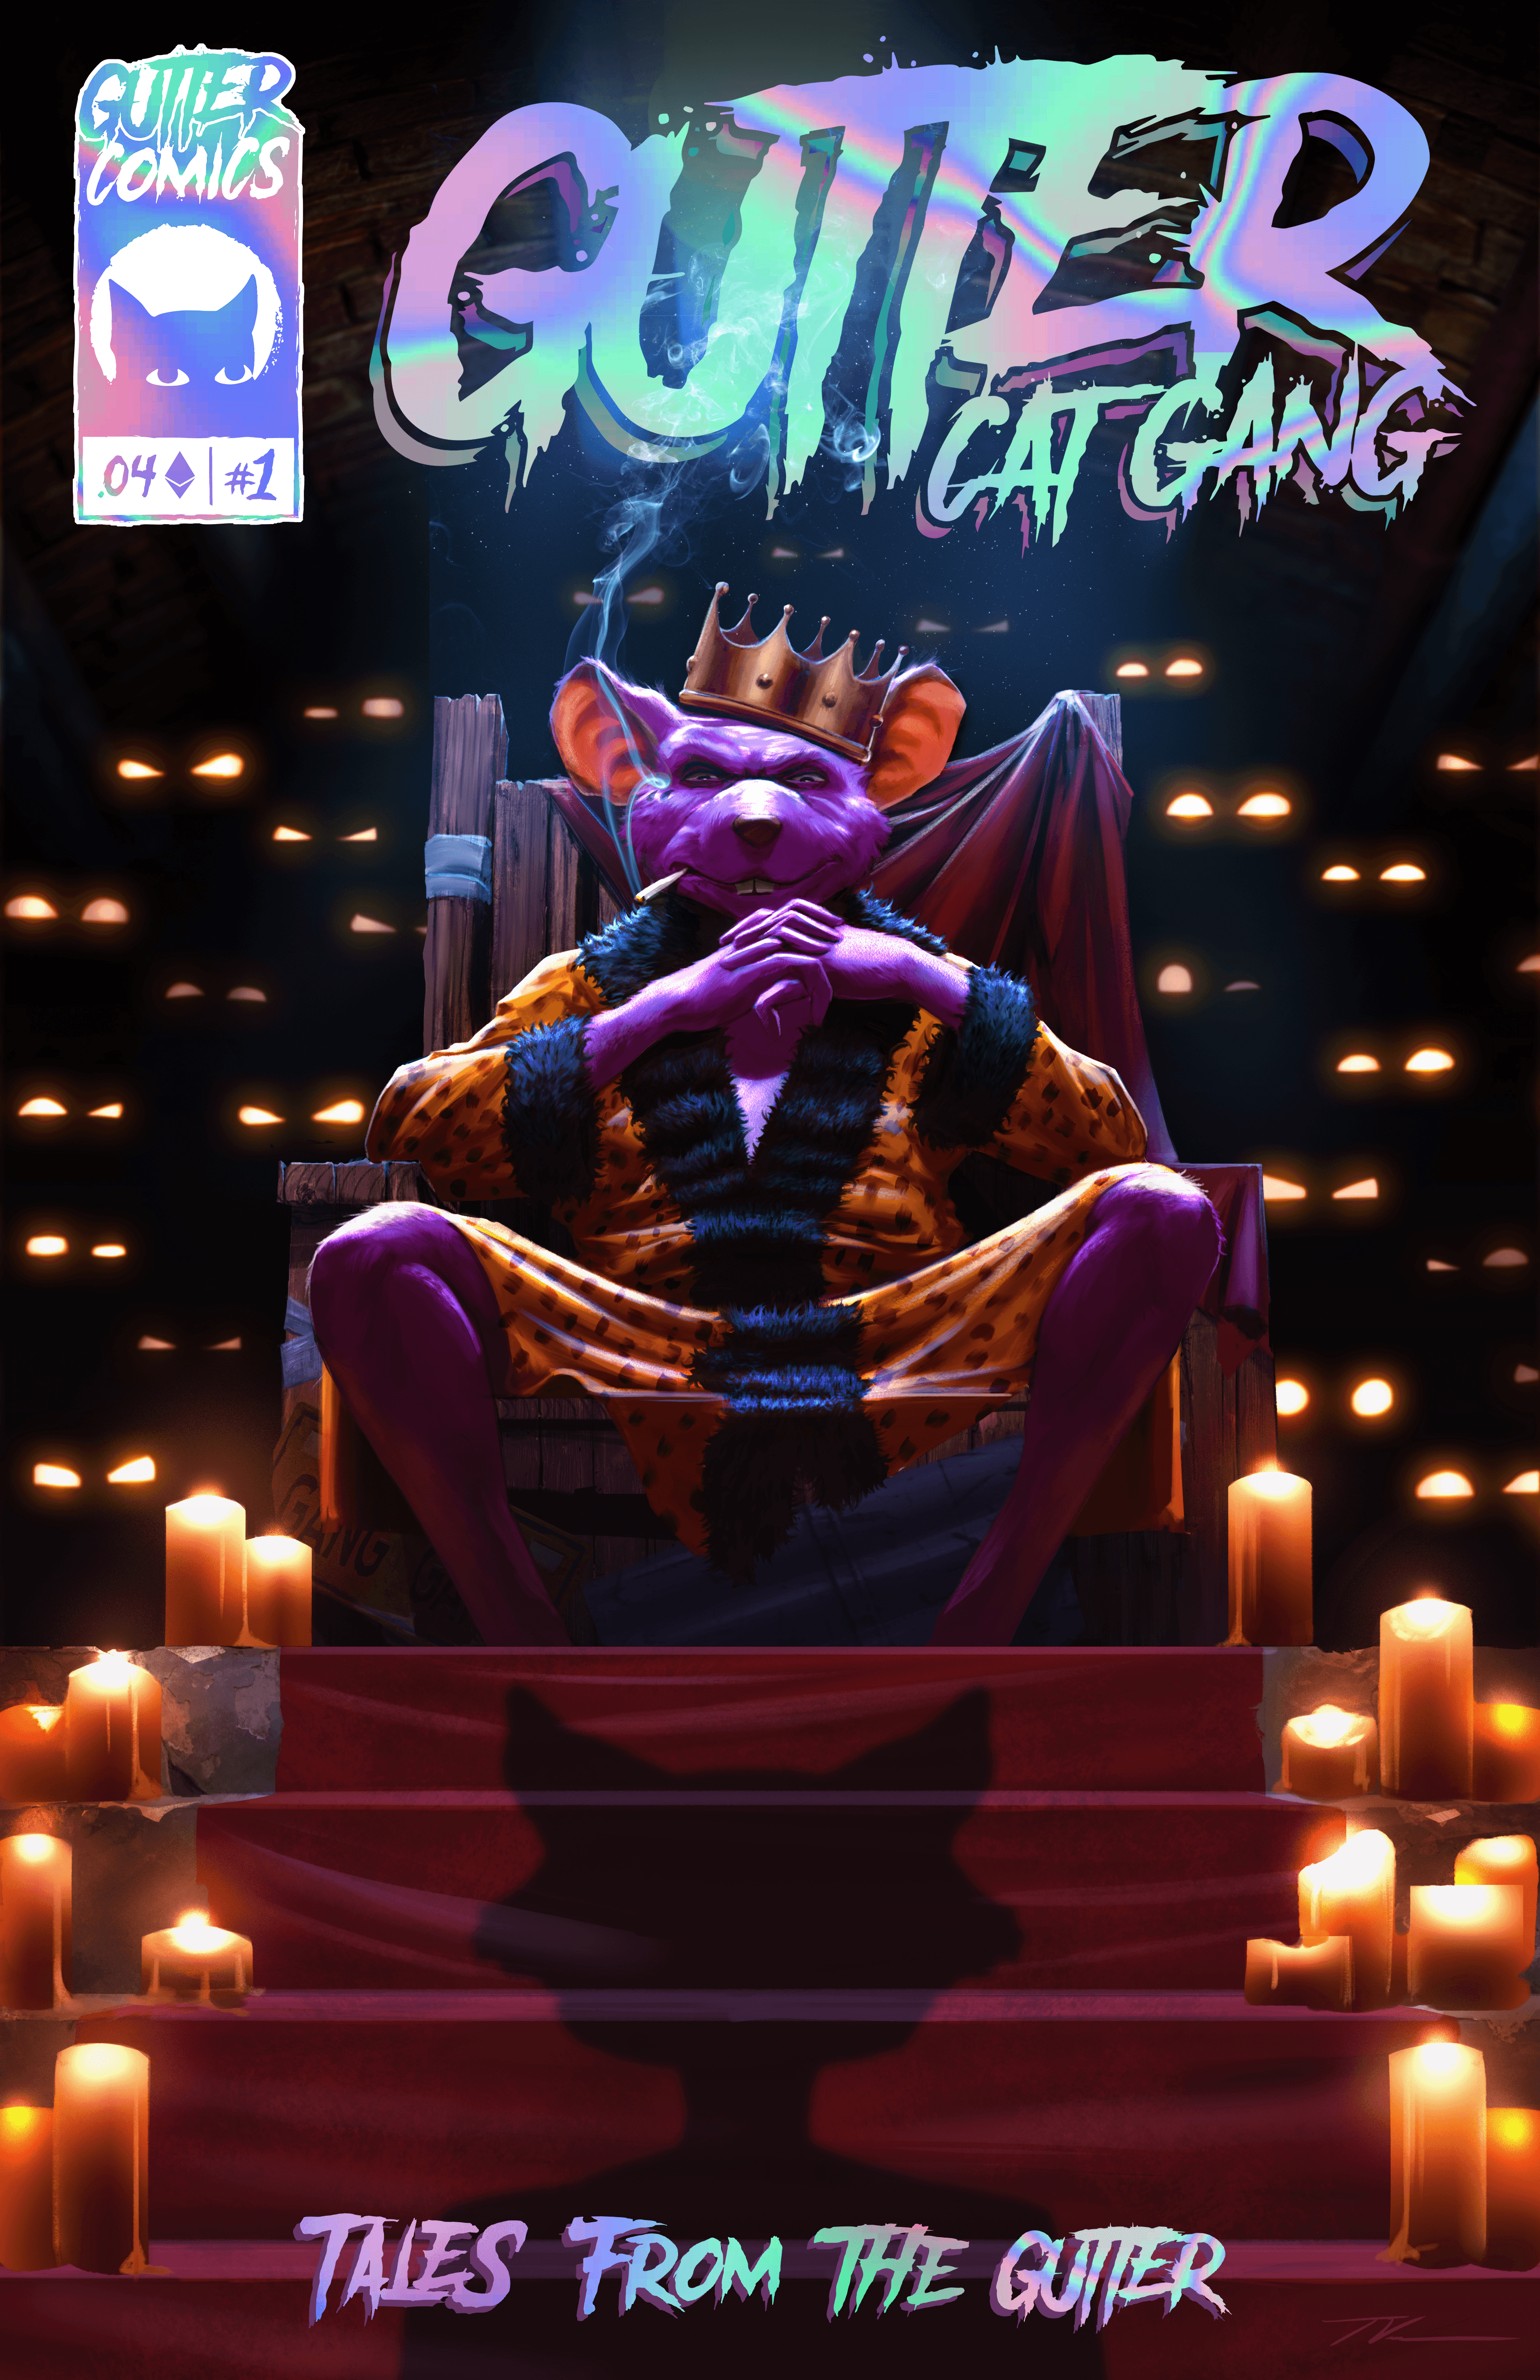 Gutter Comic #1 Throne of Lies Holographic Edition